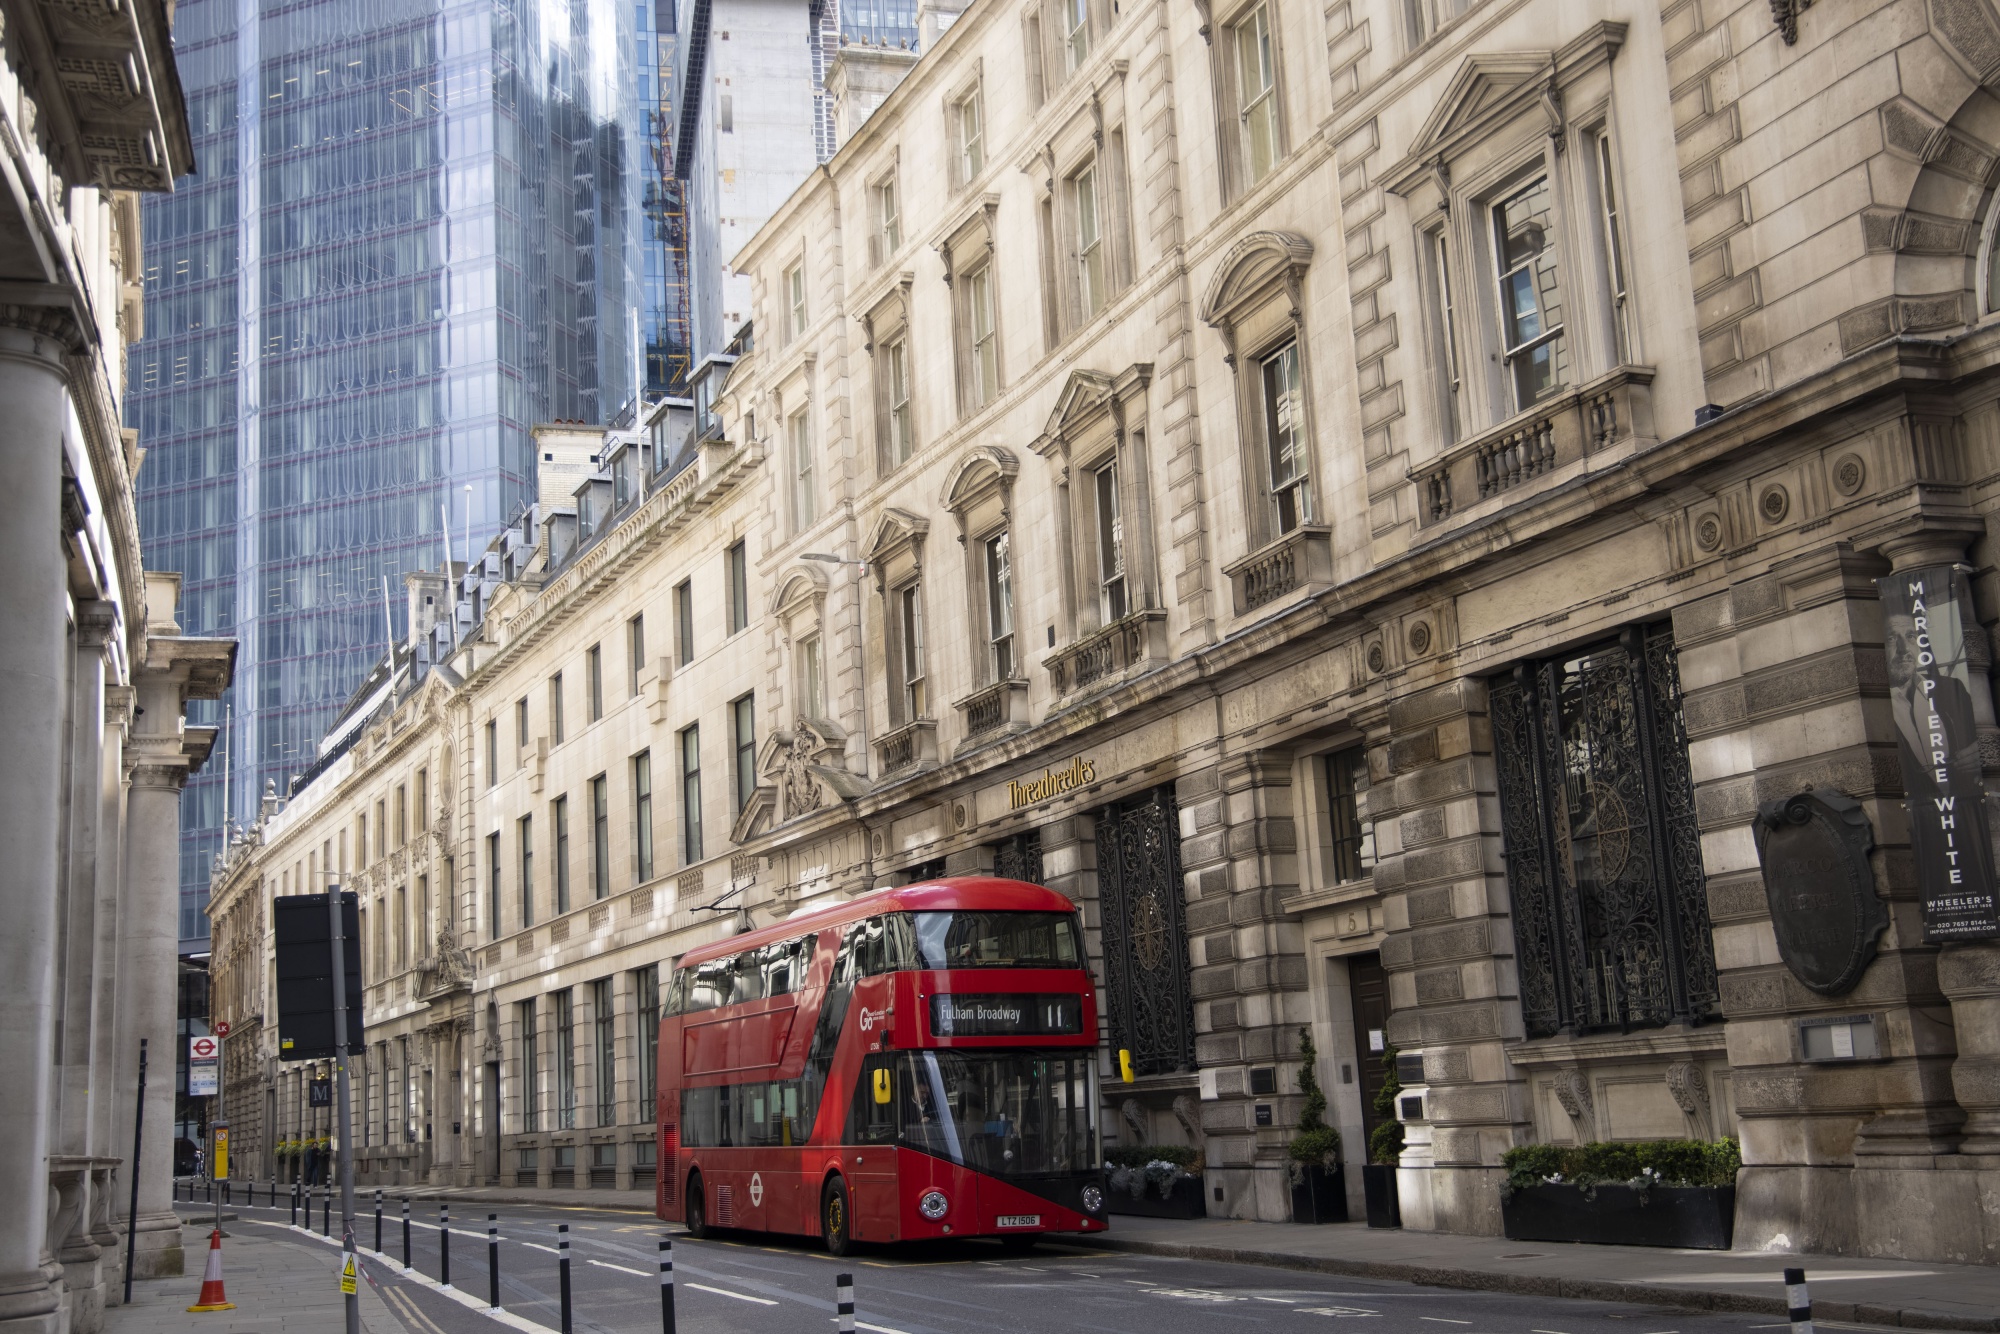 A bus travels along an empty street in the City of London, U.K., on April 13.